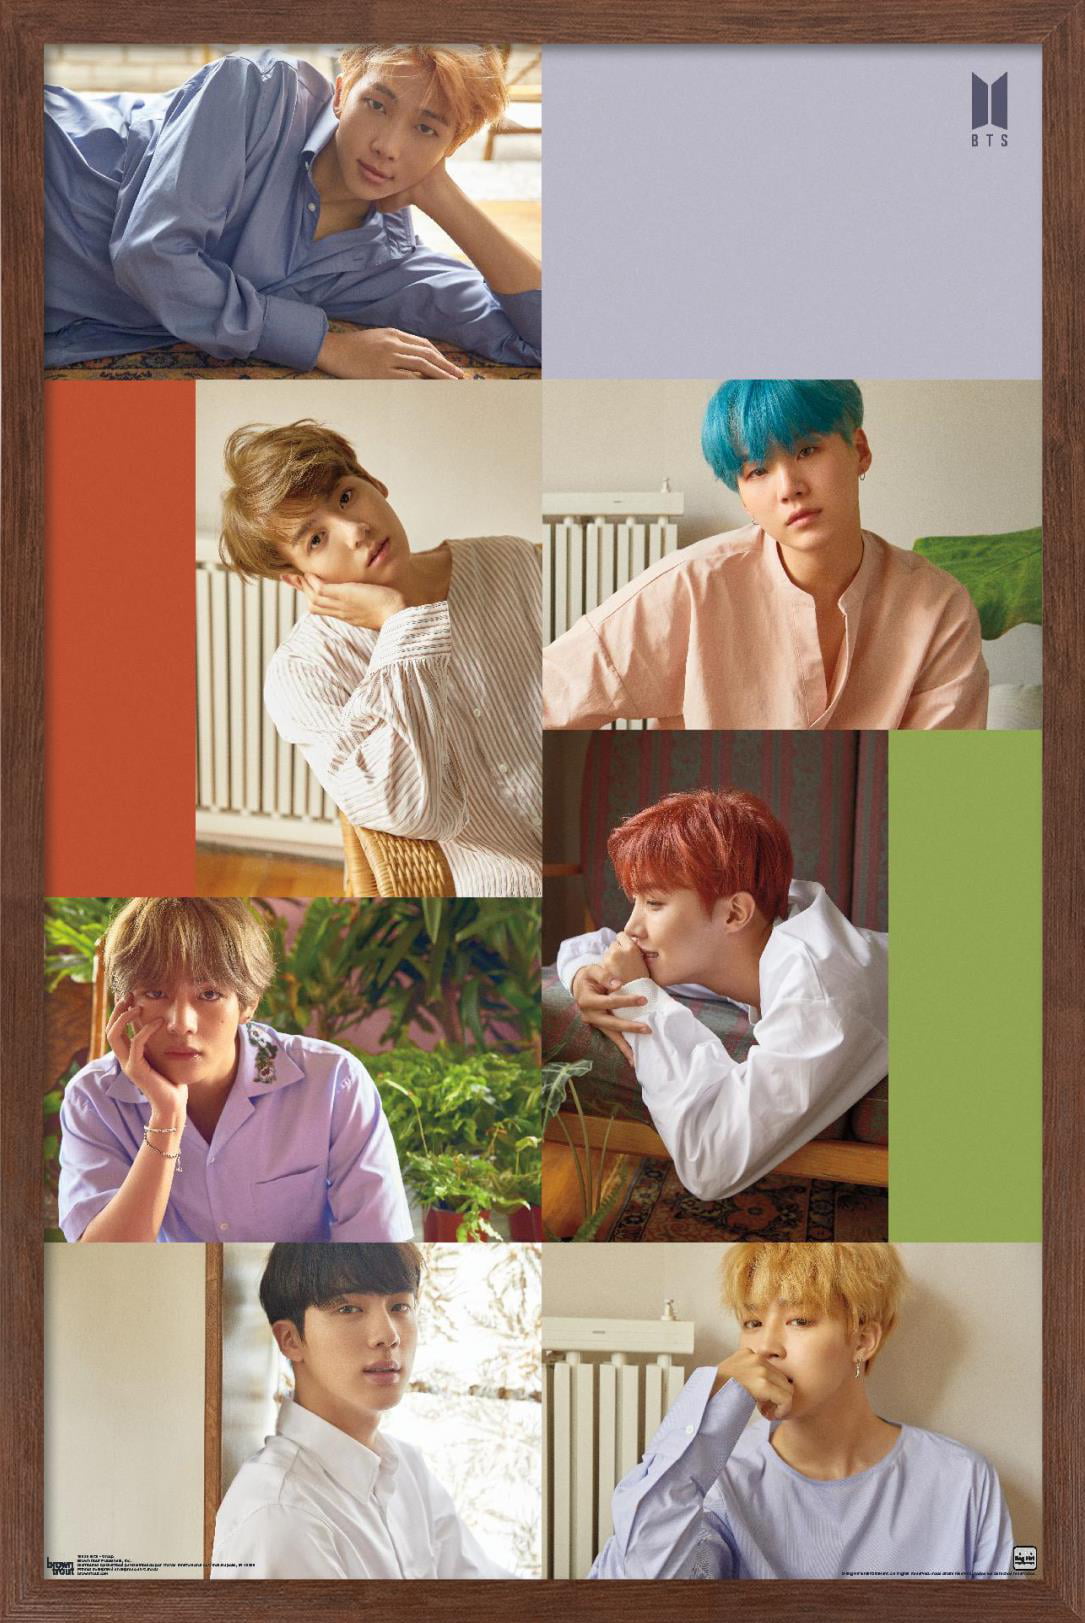 OMCCXO BTS Decorative BTS Kpop BTS Poster BTS Wall Decoration Gift Poster  Wall Art (without Frame) (Poster 40 x 50 cm)